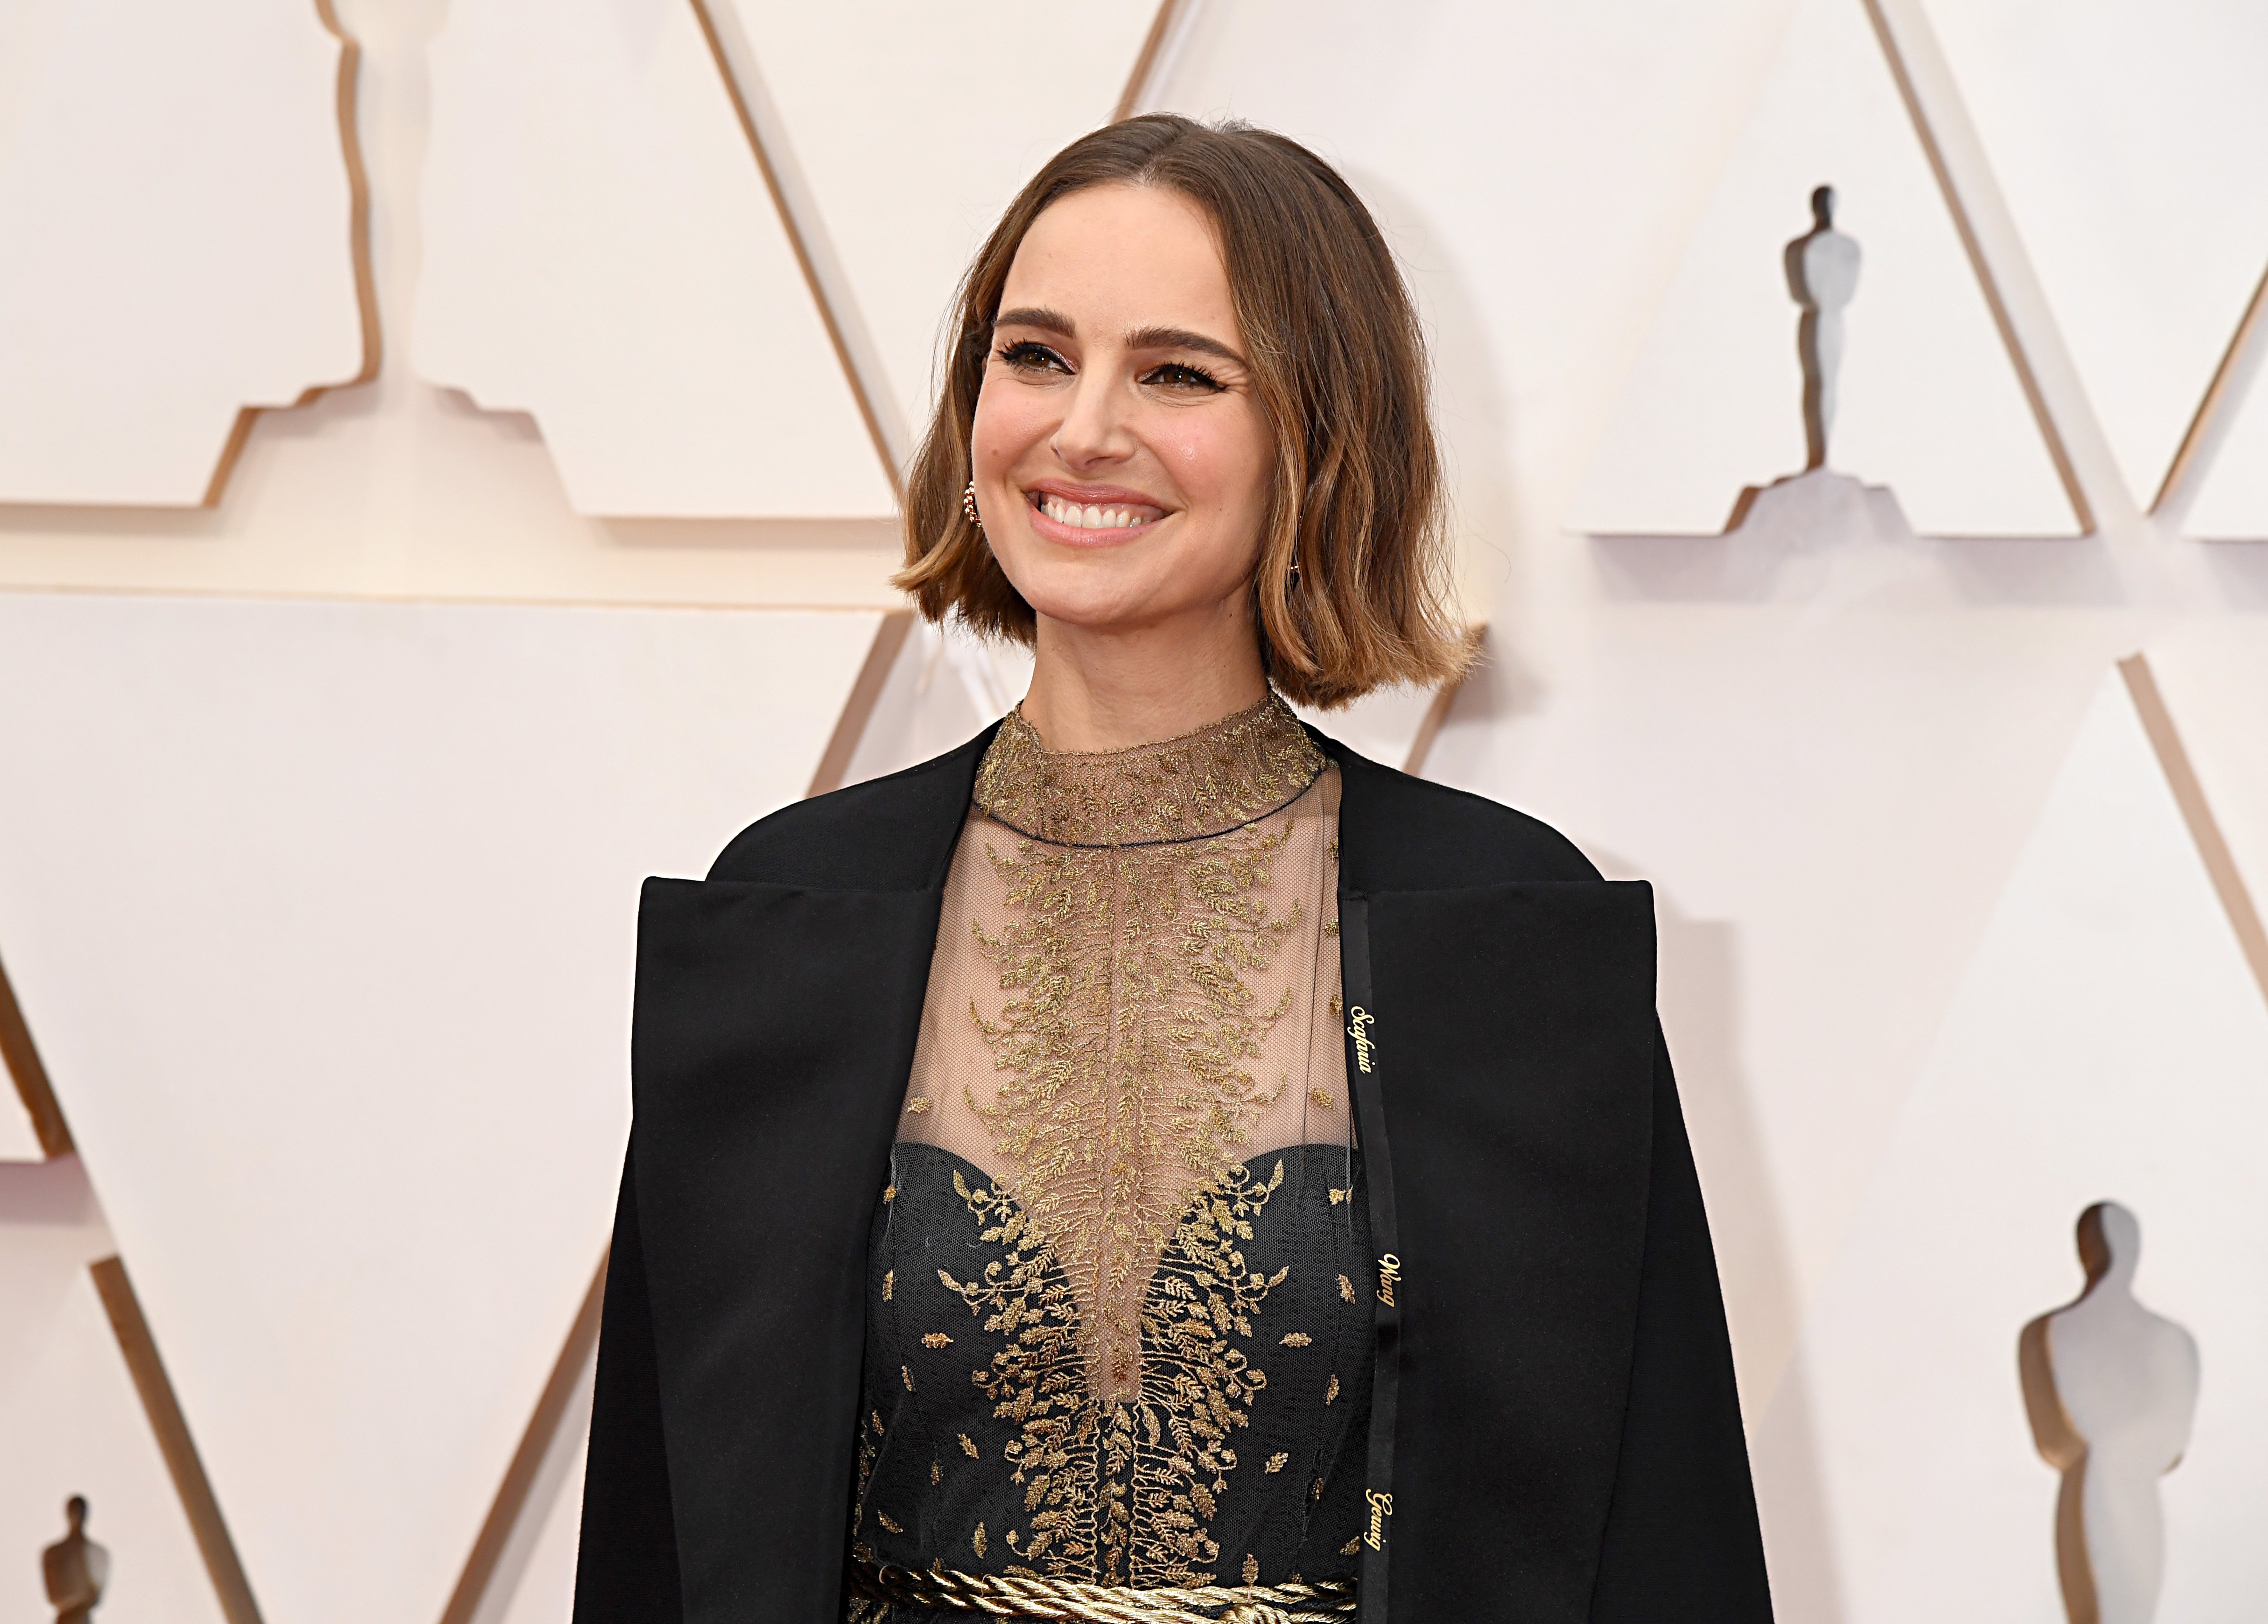 Actress Natalie Portman attending the 92nd Annual Academy Awards  Source | Photo Getty Images